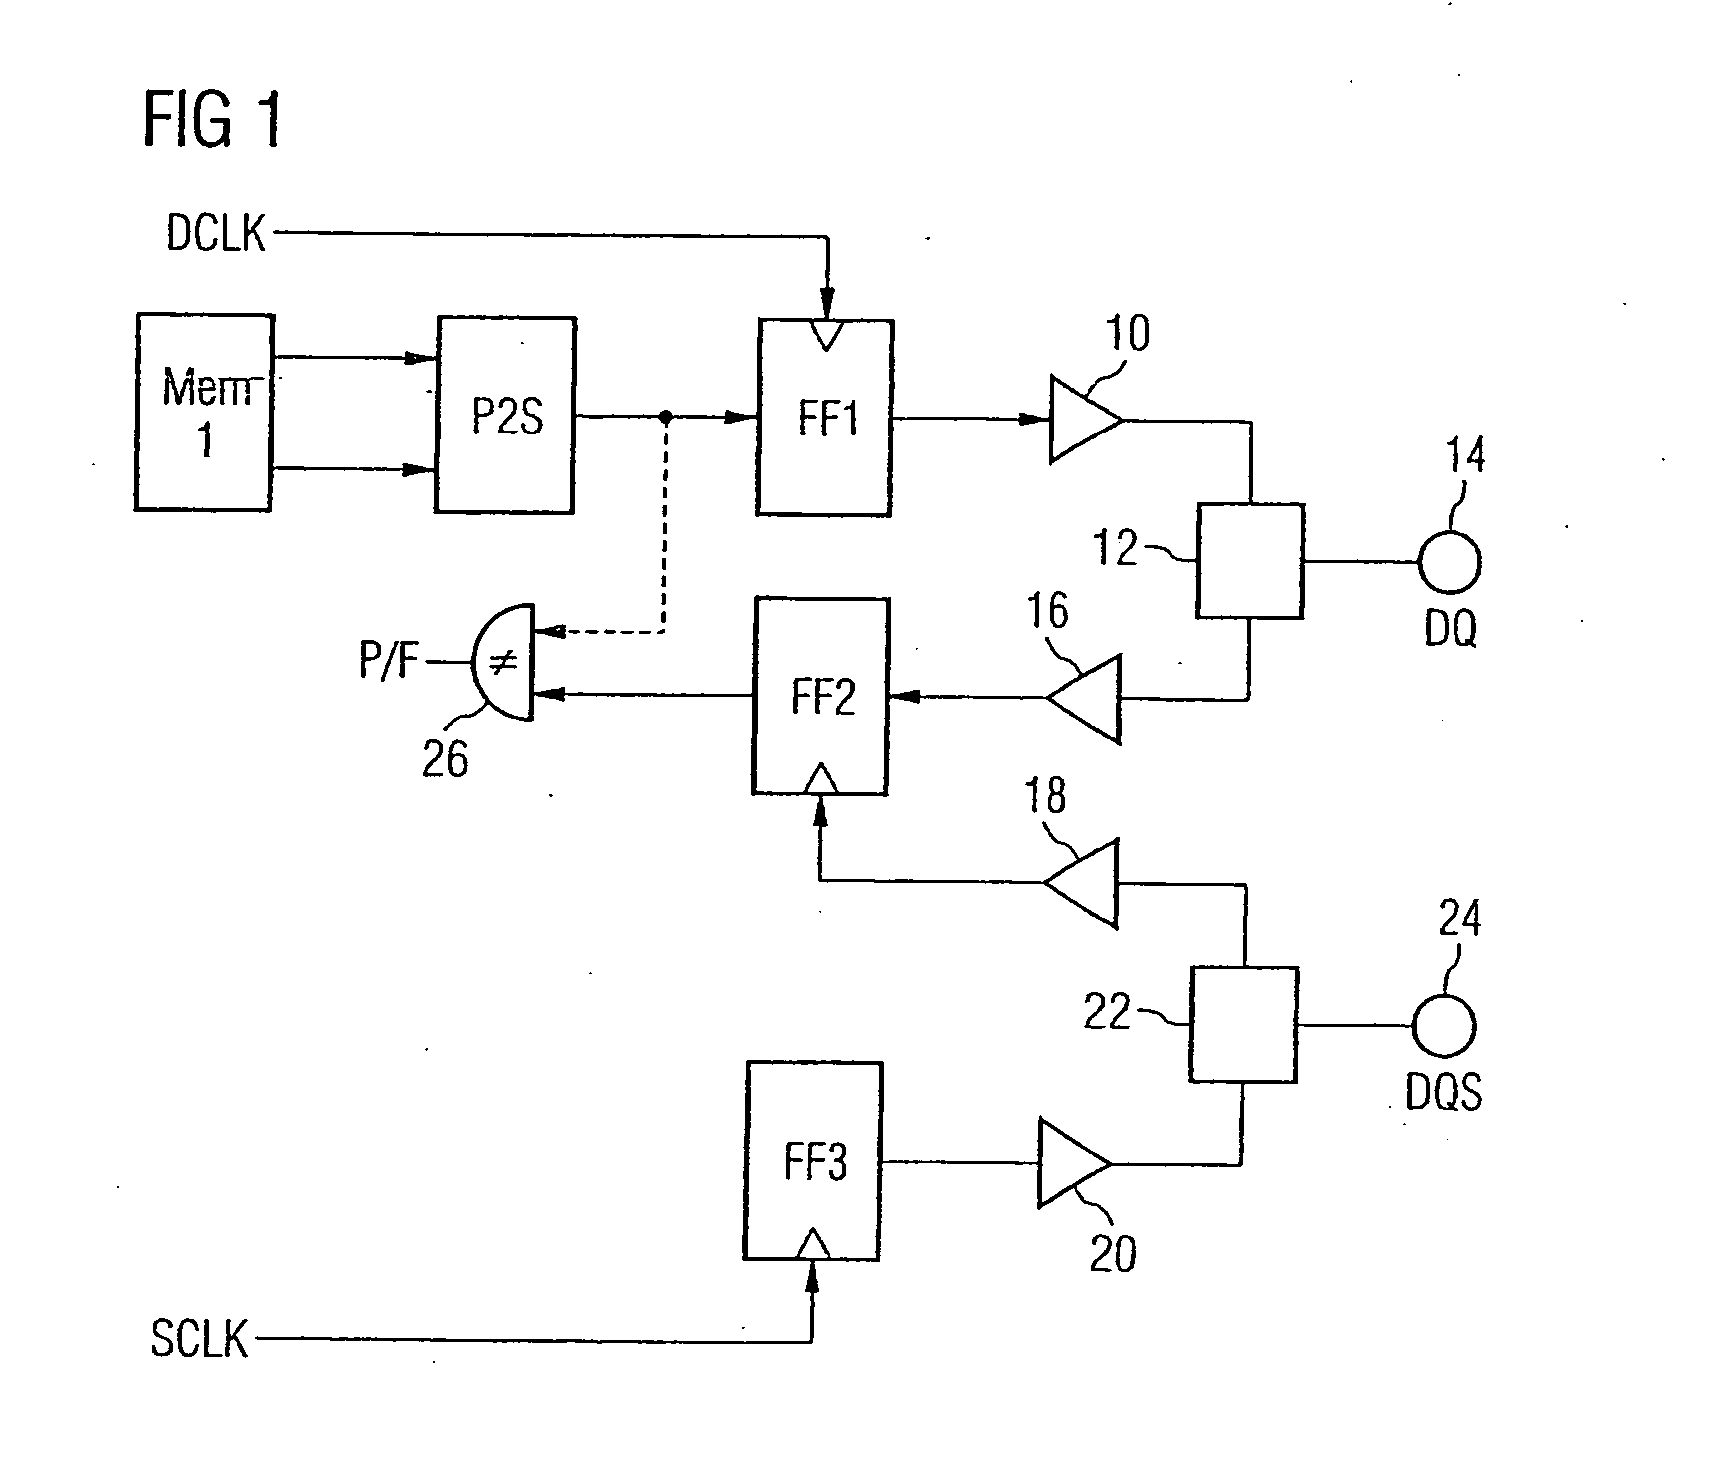 Loop-back method for measuring the interface timing of semiconductor memory devices using the normal mode memory